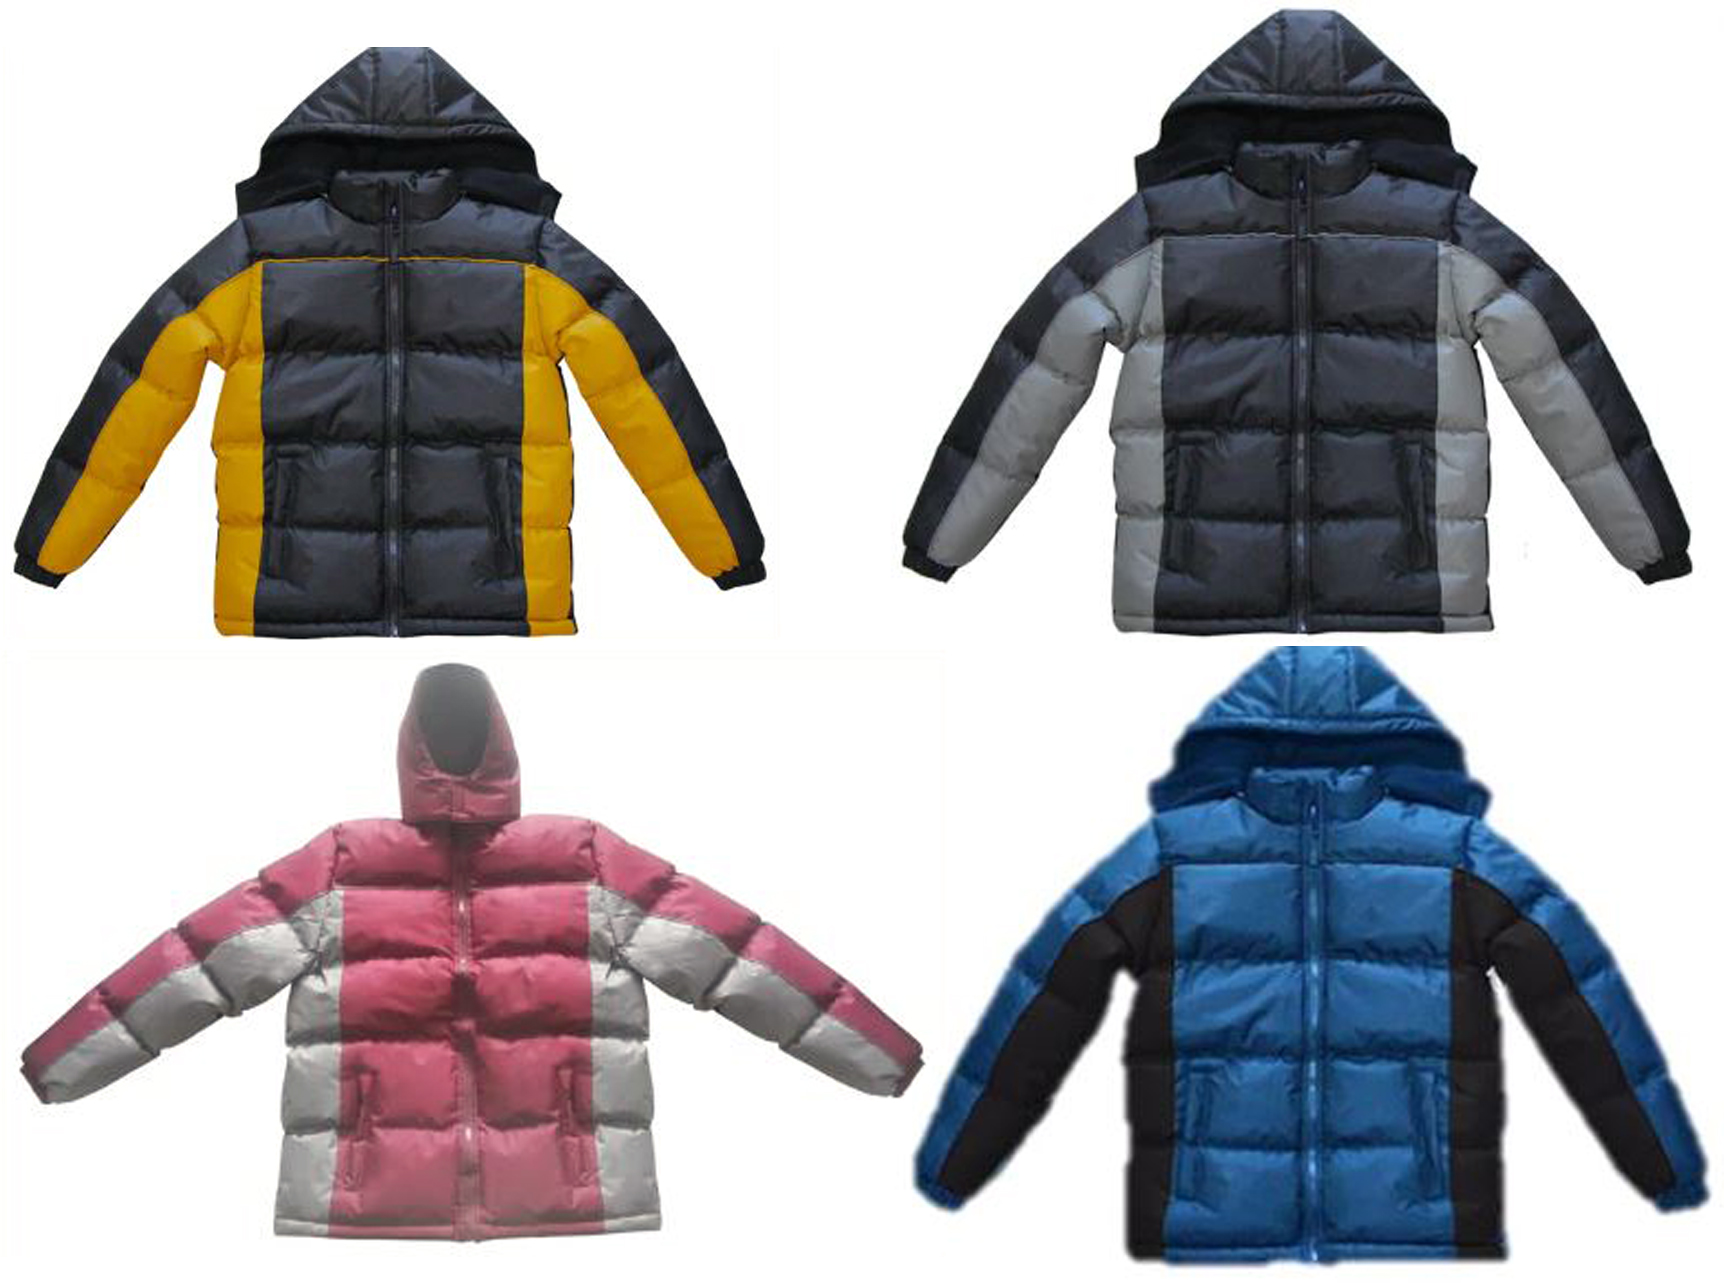 Boy's Insulated Fleece Lined Puff JACKETs w/ Detachable Hood - Sizes 8-16 - Choose Your Color(s)